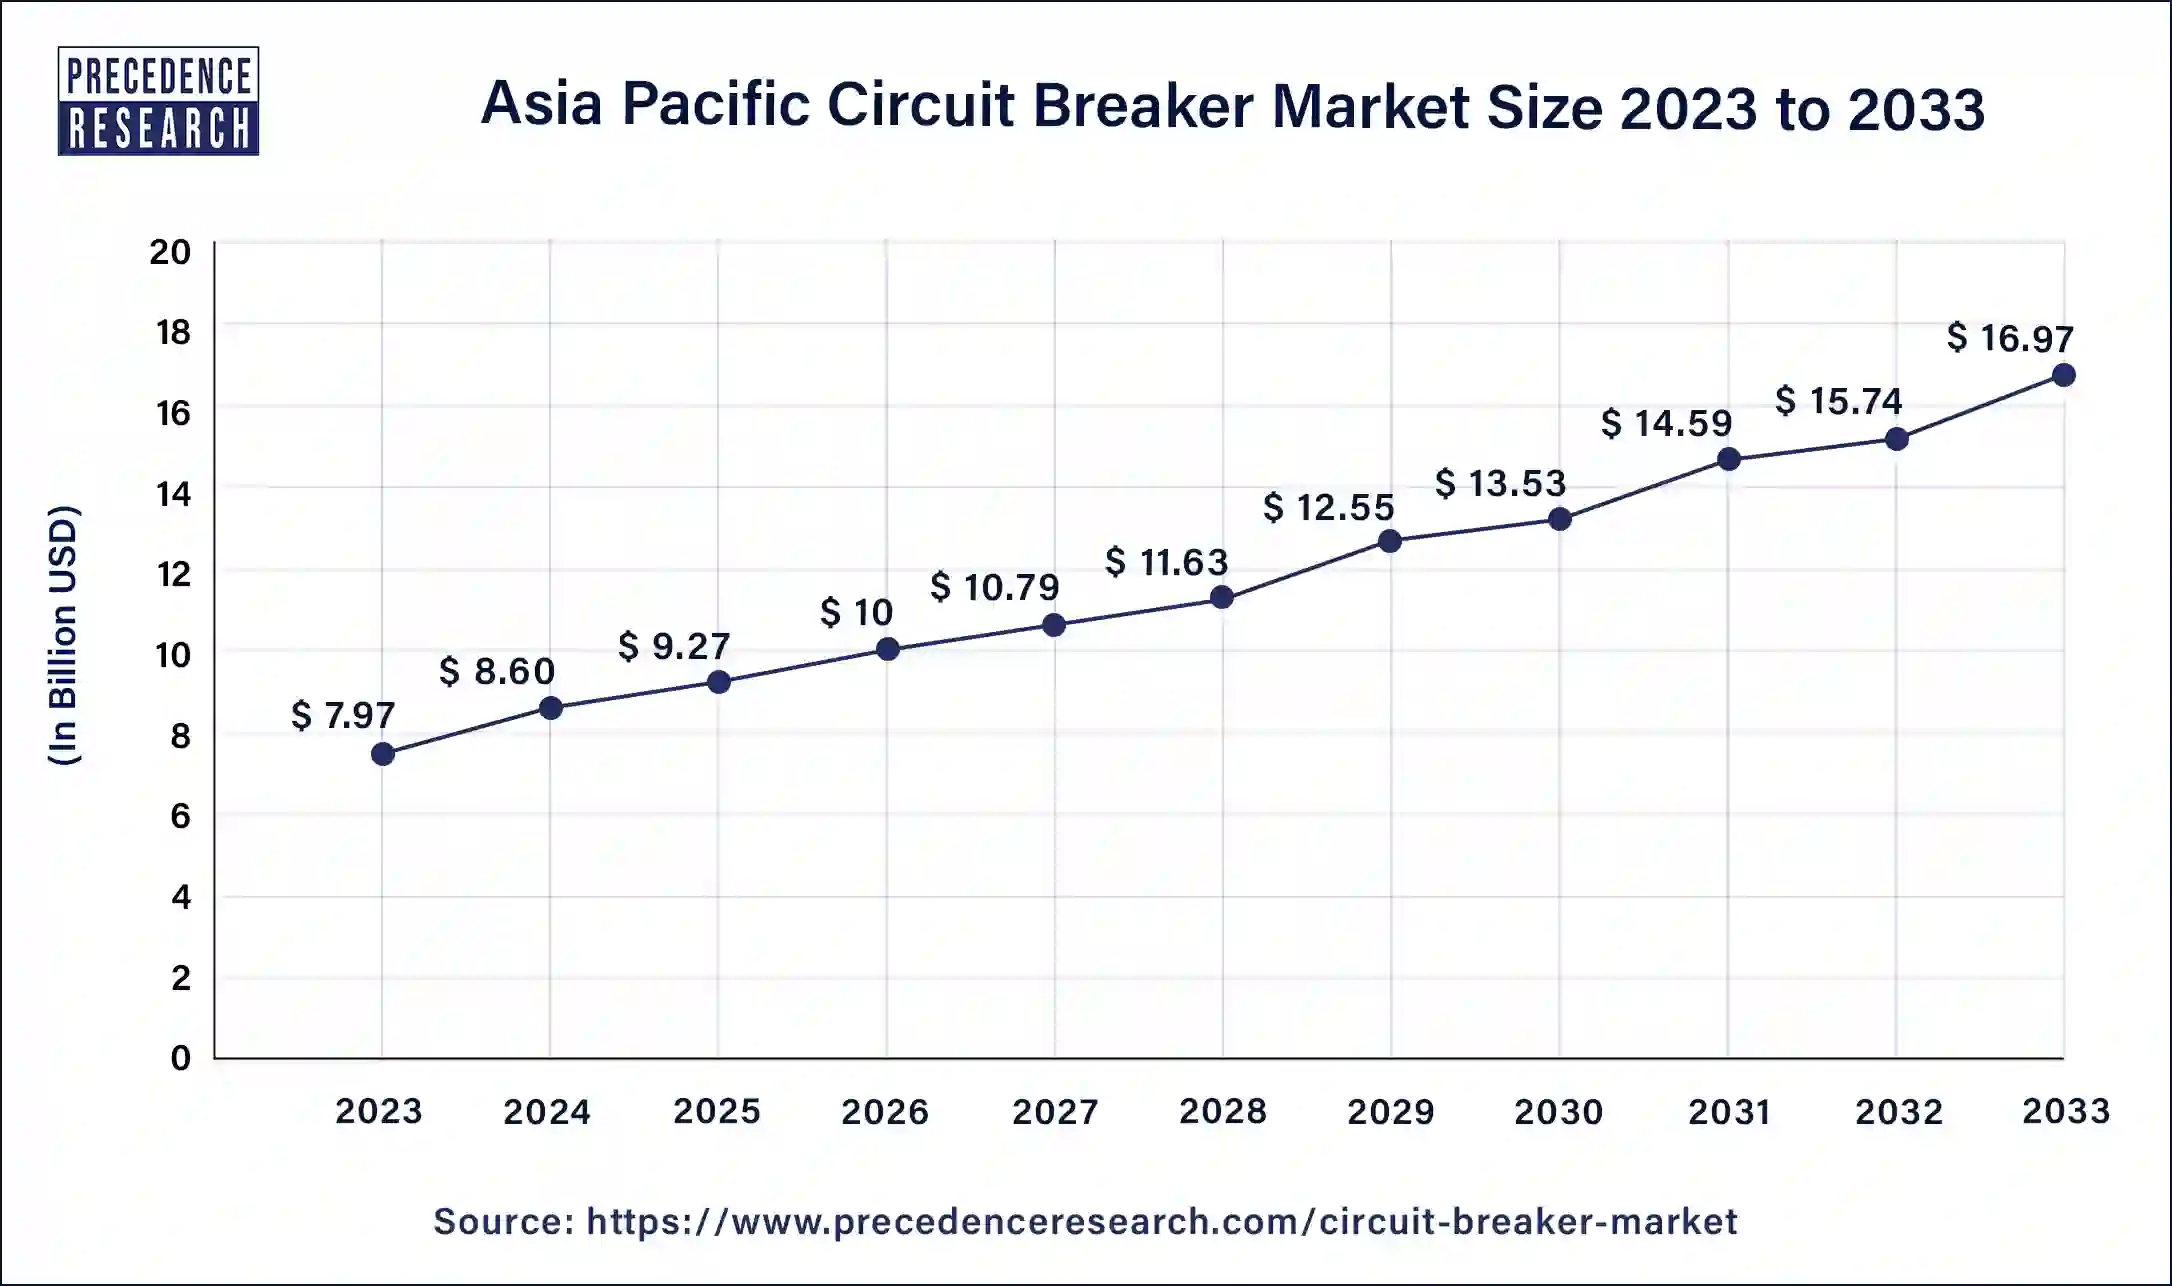 Asia Pacific Circuit Breaker Market Size 2024 to 2033